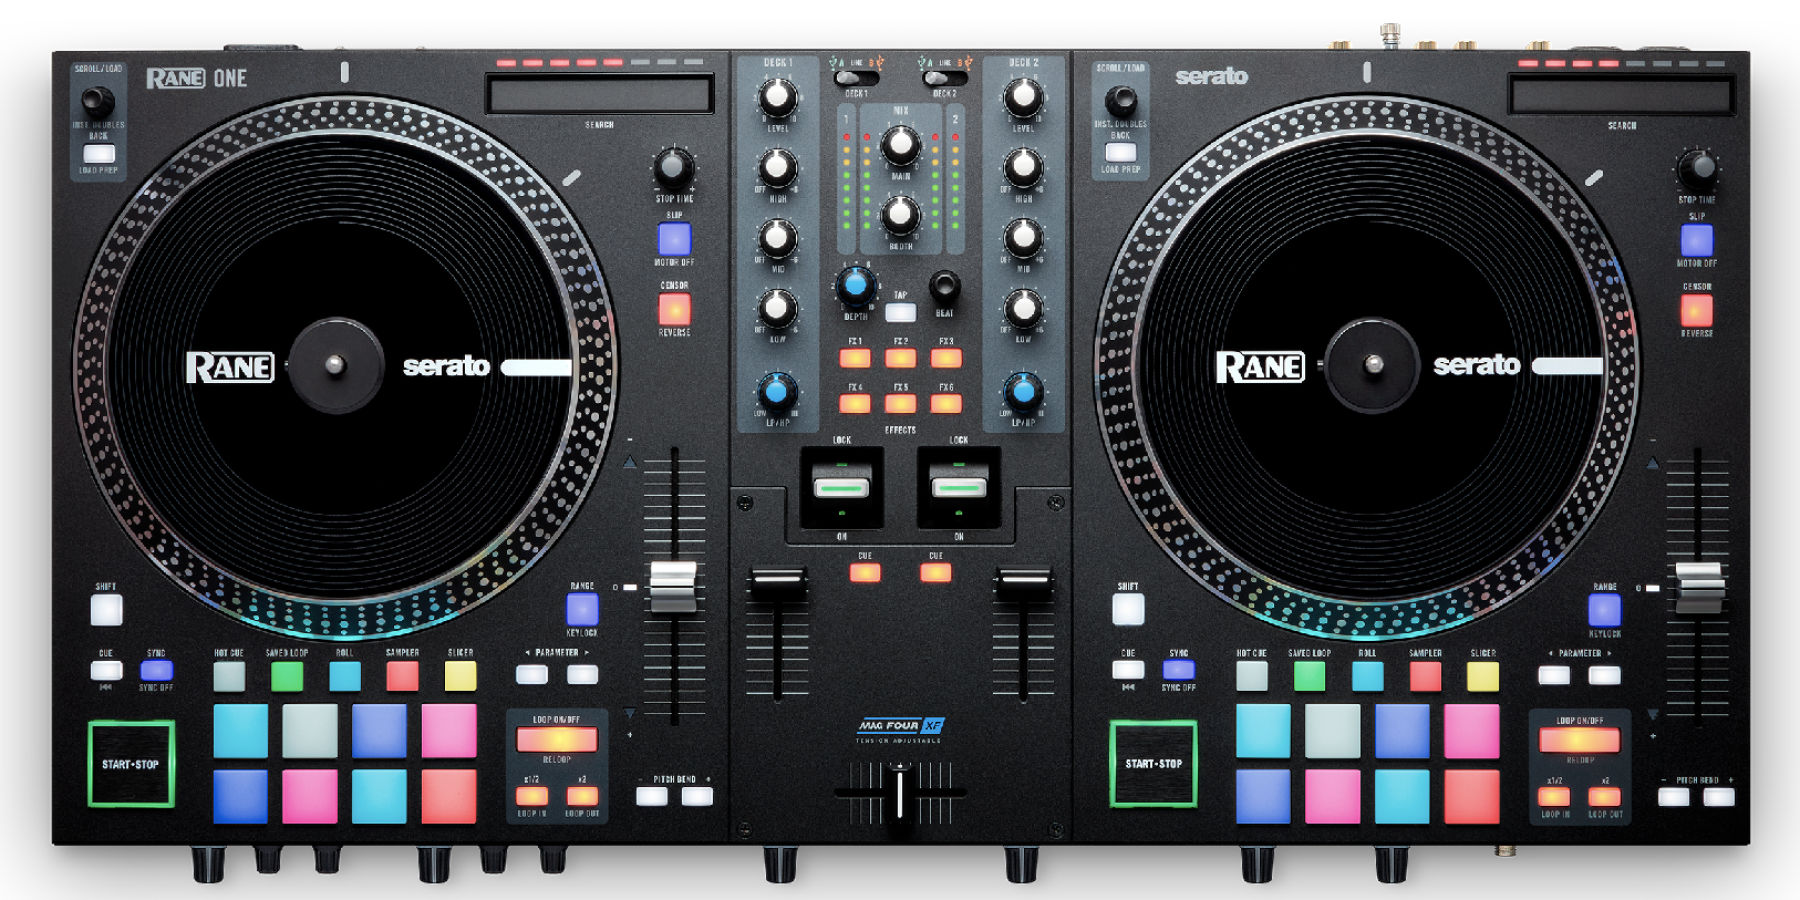 Mer information om "Rane unveils the 'One', the only motorized dj controller with Rane's famous industrial build quality"